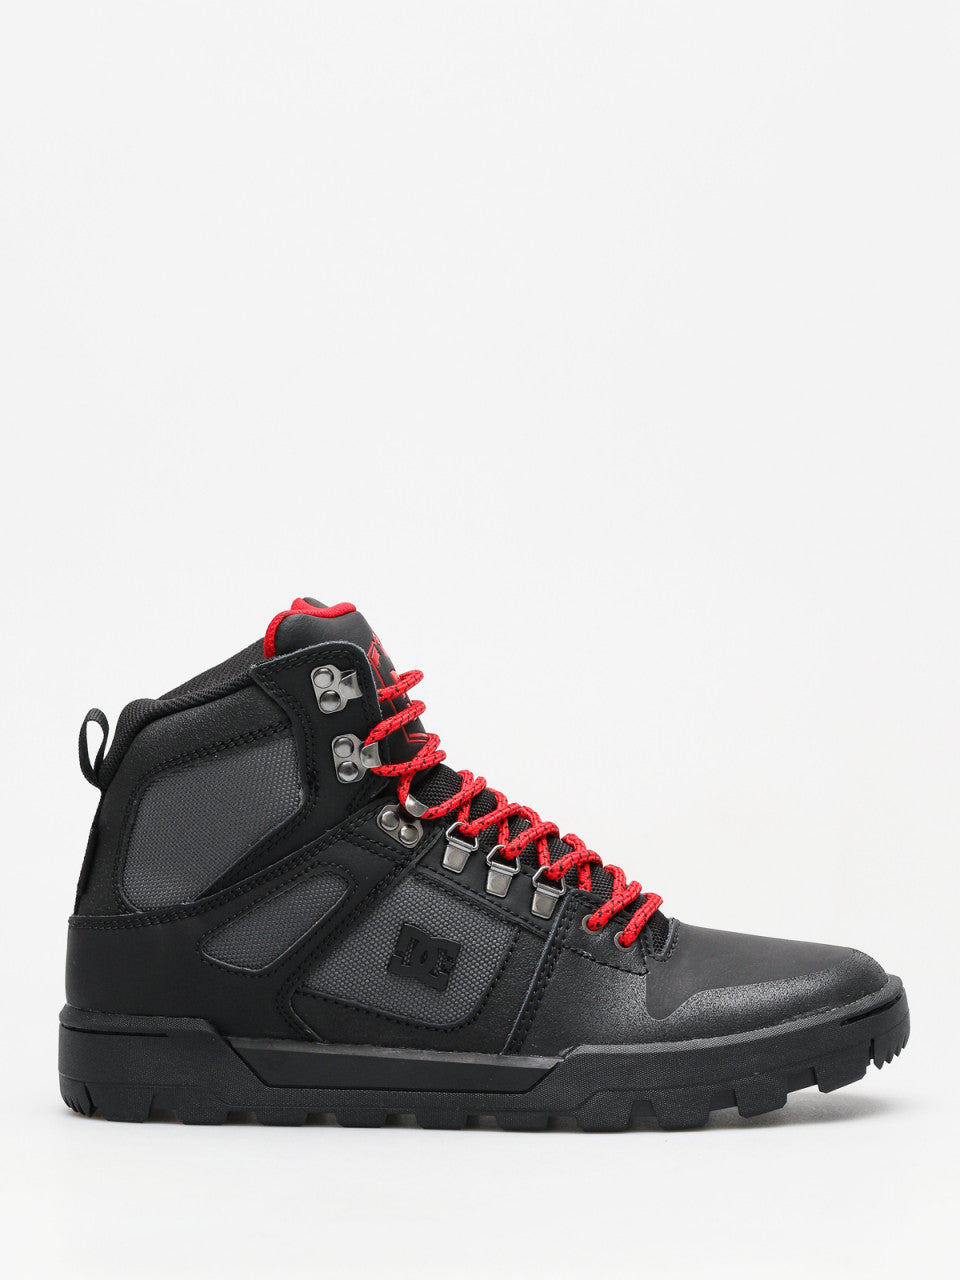 DCS PURE HIGH-TOP WR BOOT BLACK GREY RED